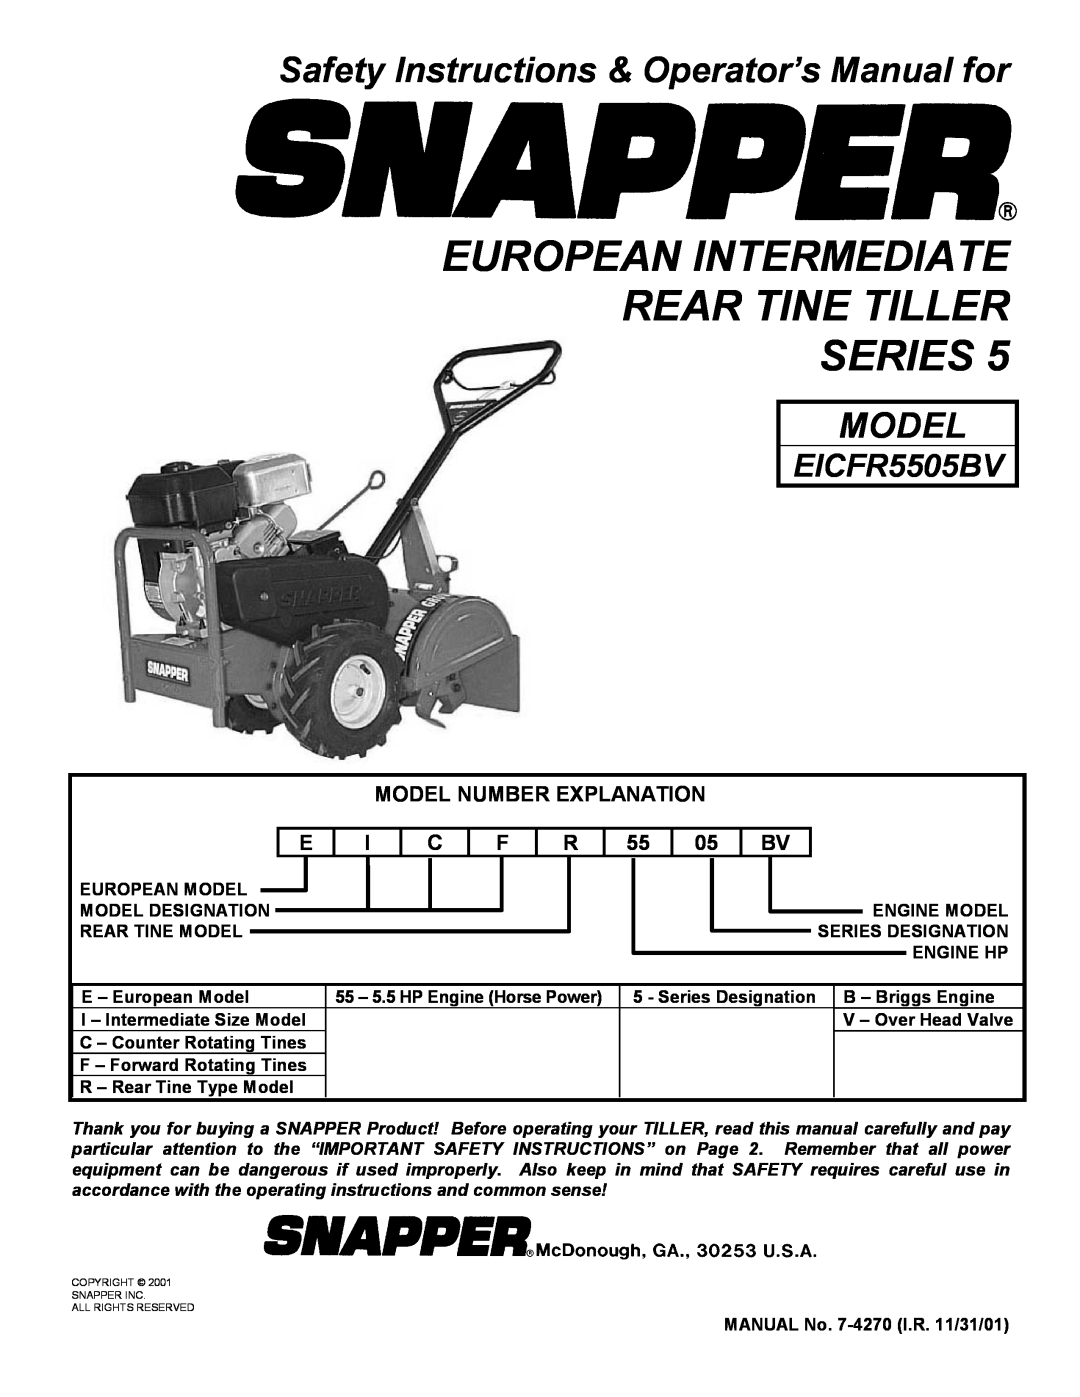 Snapper EICFR5505BV important safety instructions Safety Instructions & Operator’s Manual for, Model 